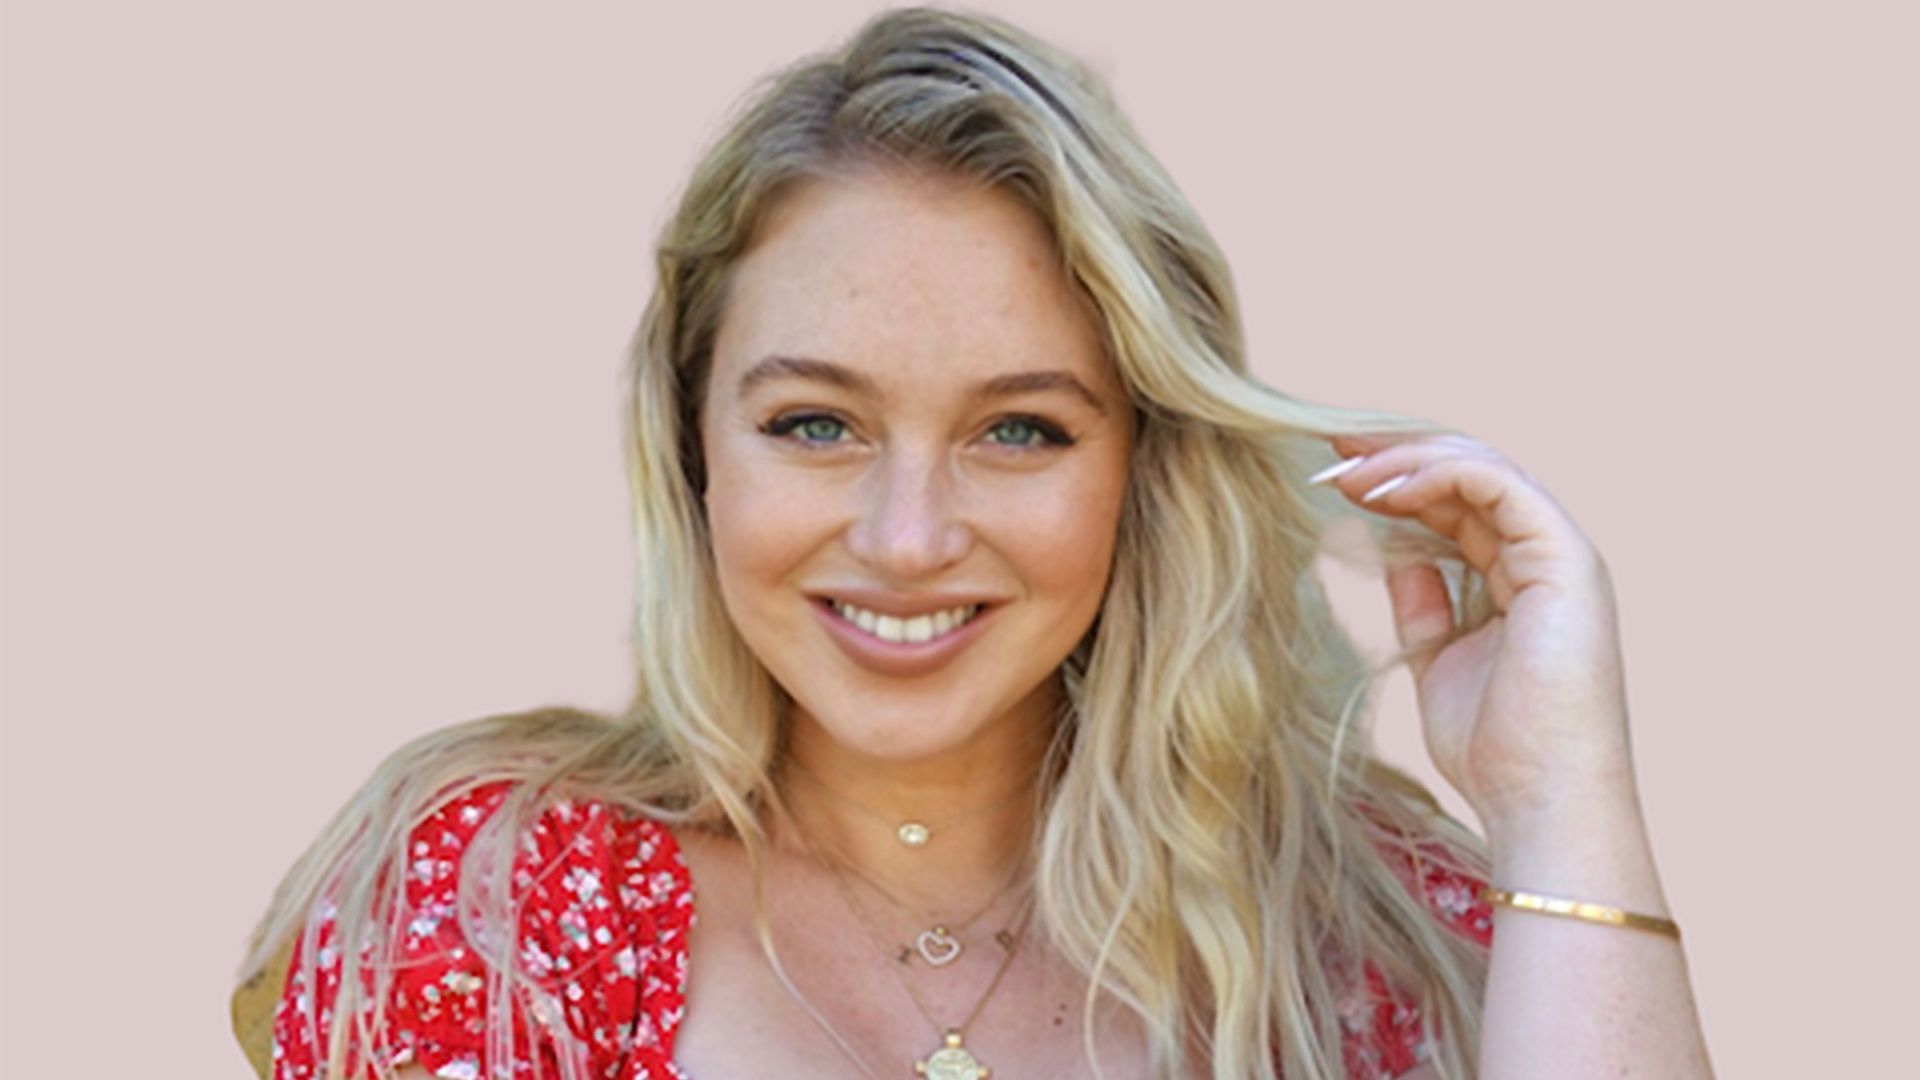 Iskra Lawrence pens powerful open letter to her younger self on body positivity: 'I know right now you think you aren't thin enough'